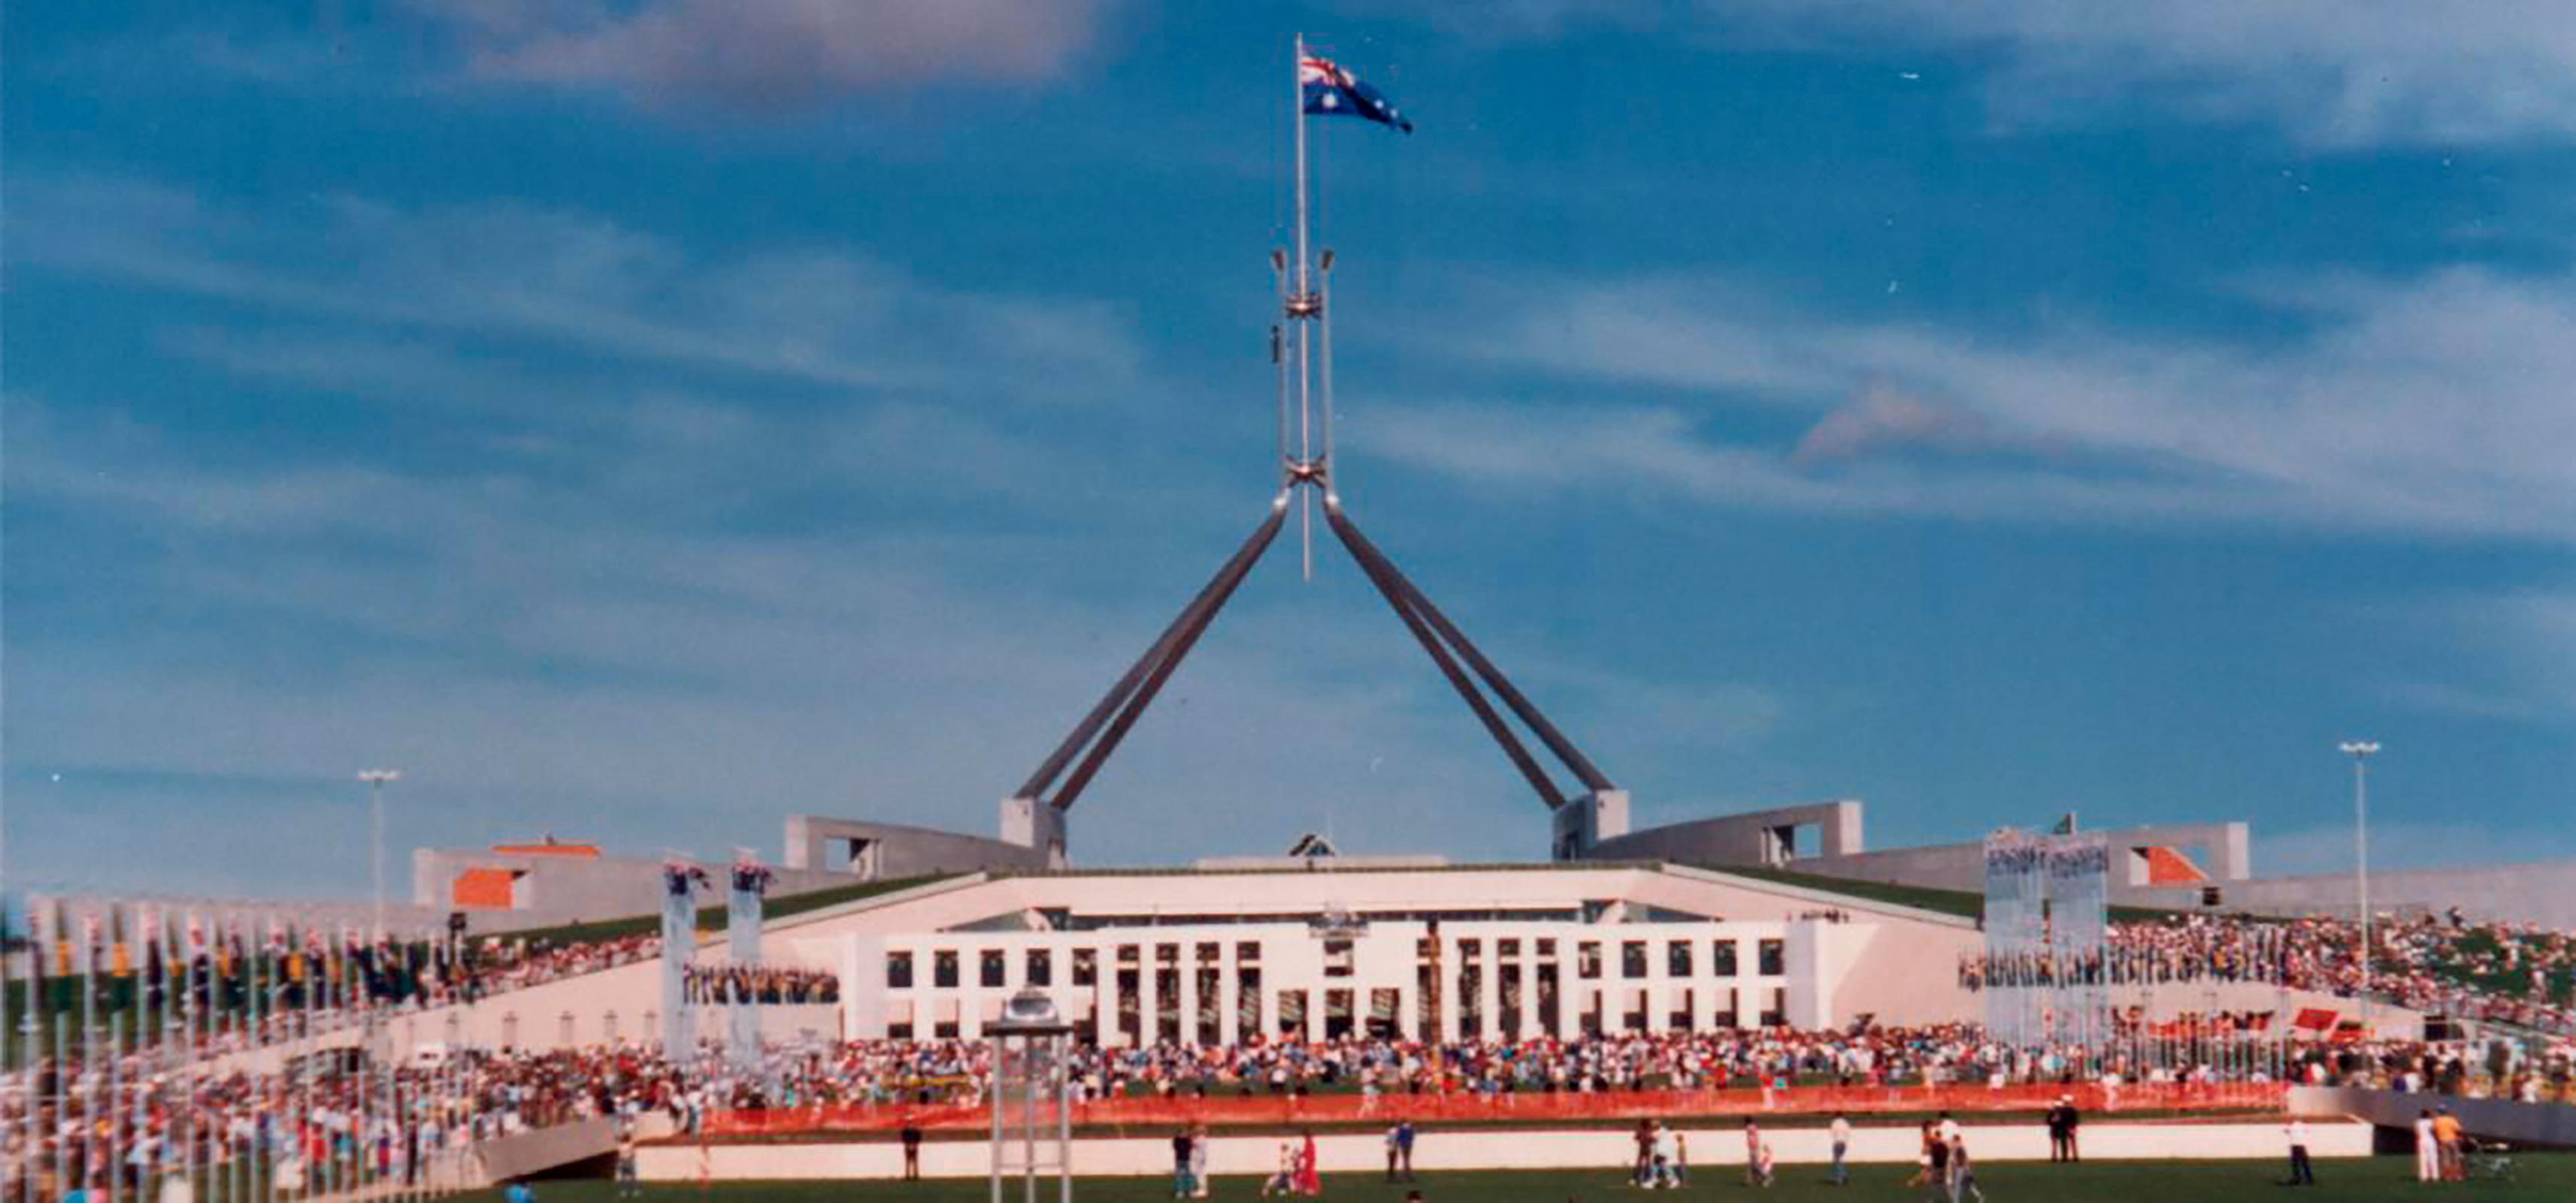 Crowds attend the official opening of the new Parliament House building, Canberra, 1988